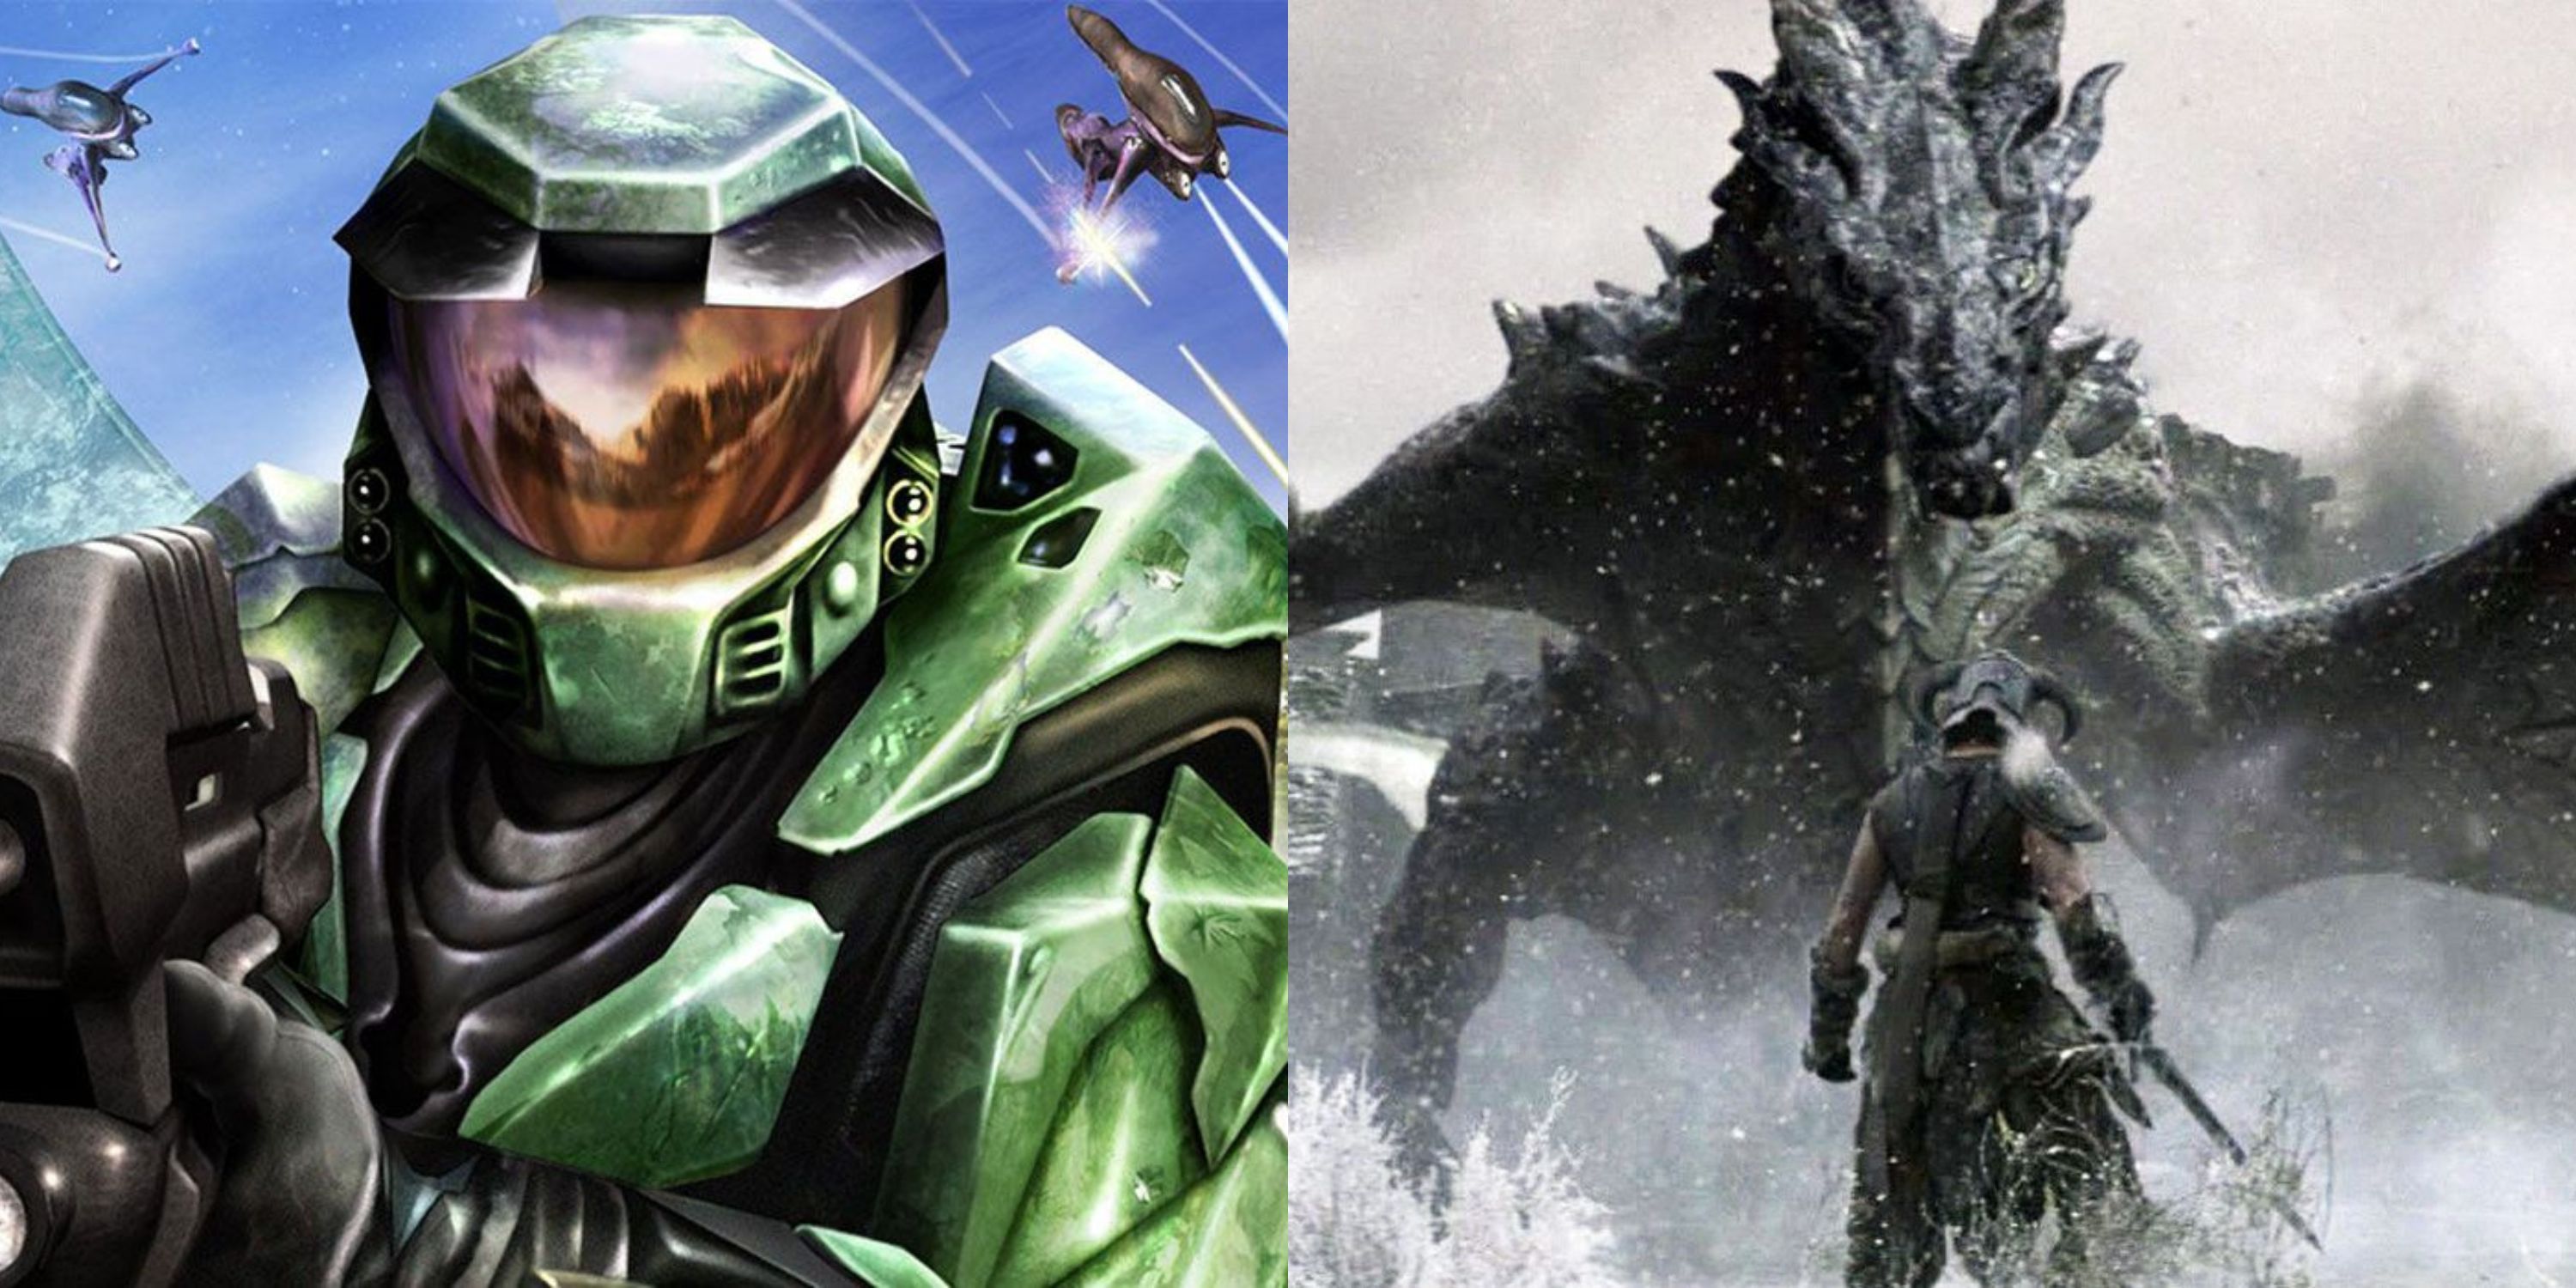 10 Video Games With The Best Soundtracks, According To Reddit